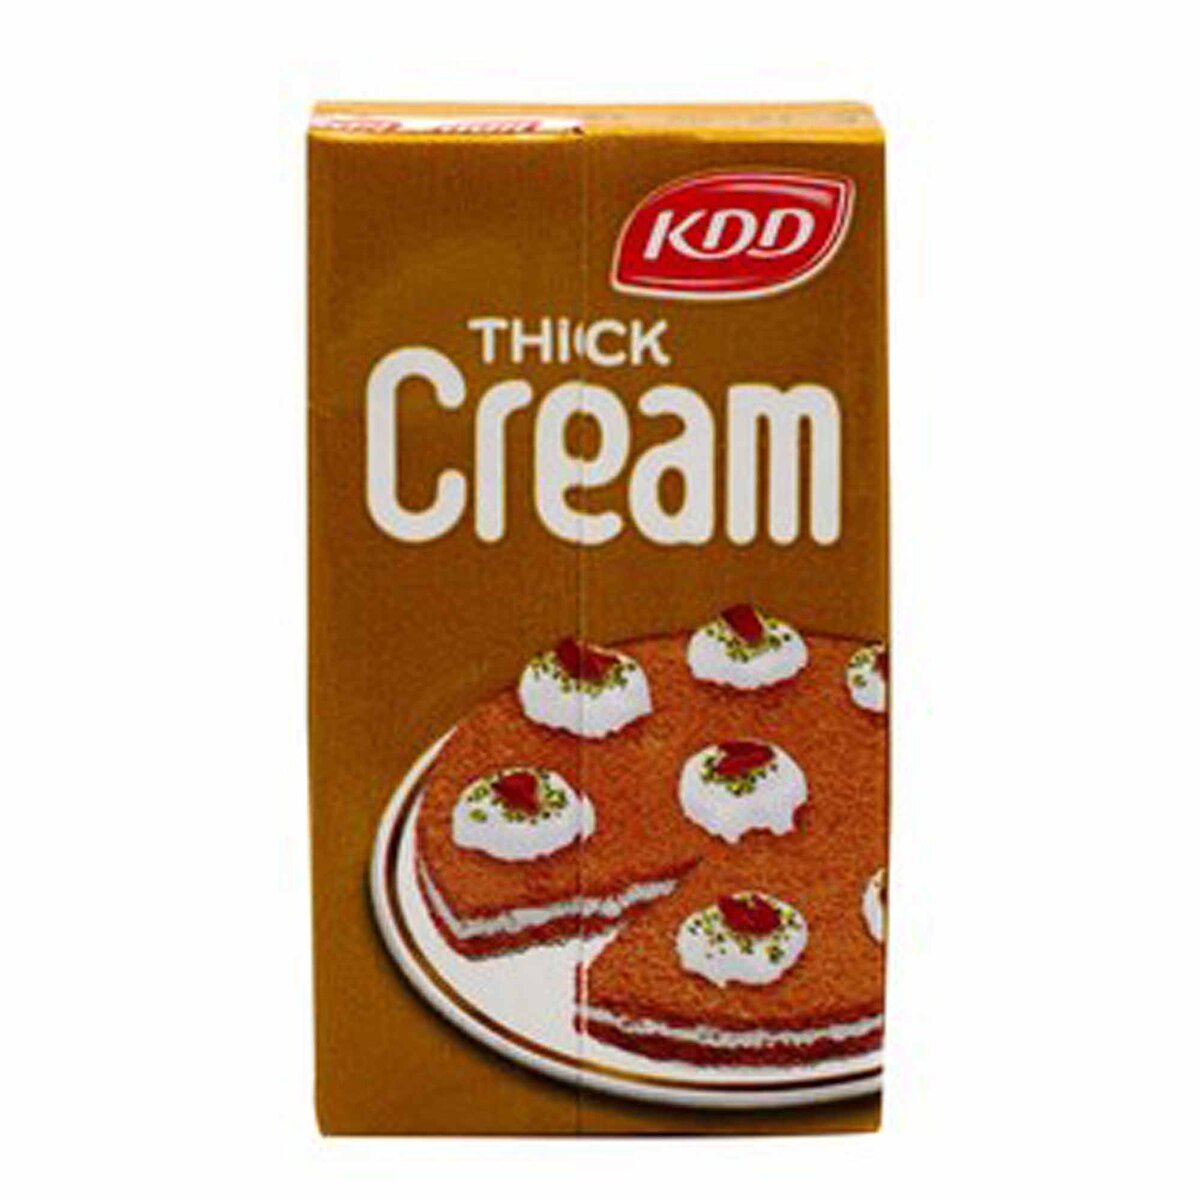 Buy KDD Thick Cream 4 x 125 ml Online at Best Price | Other Dairy Products | Lulu KSA in Saudi Arabia